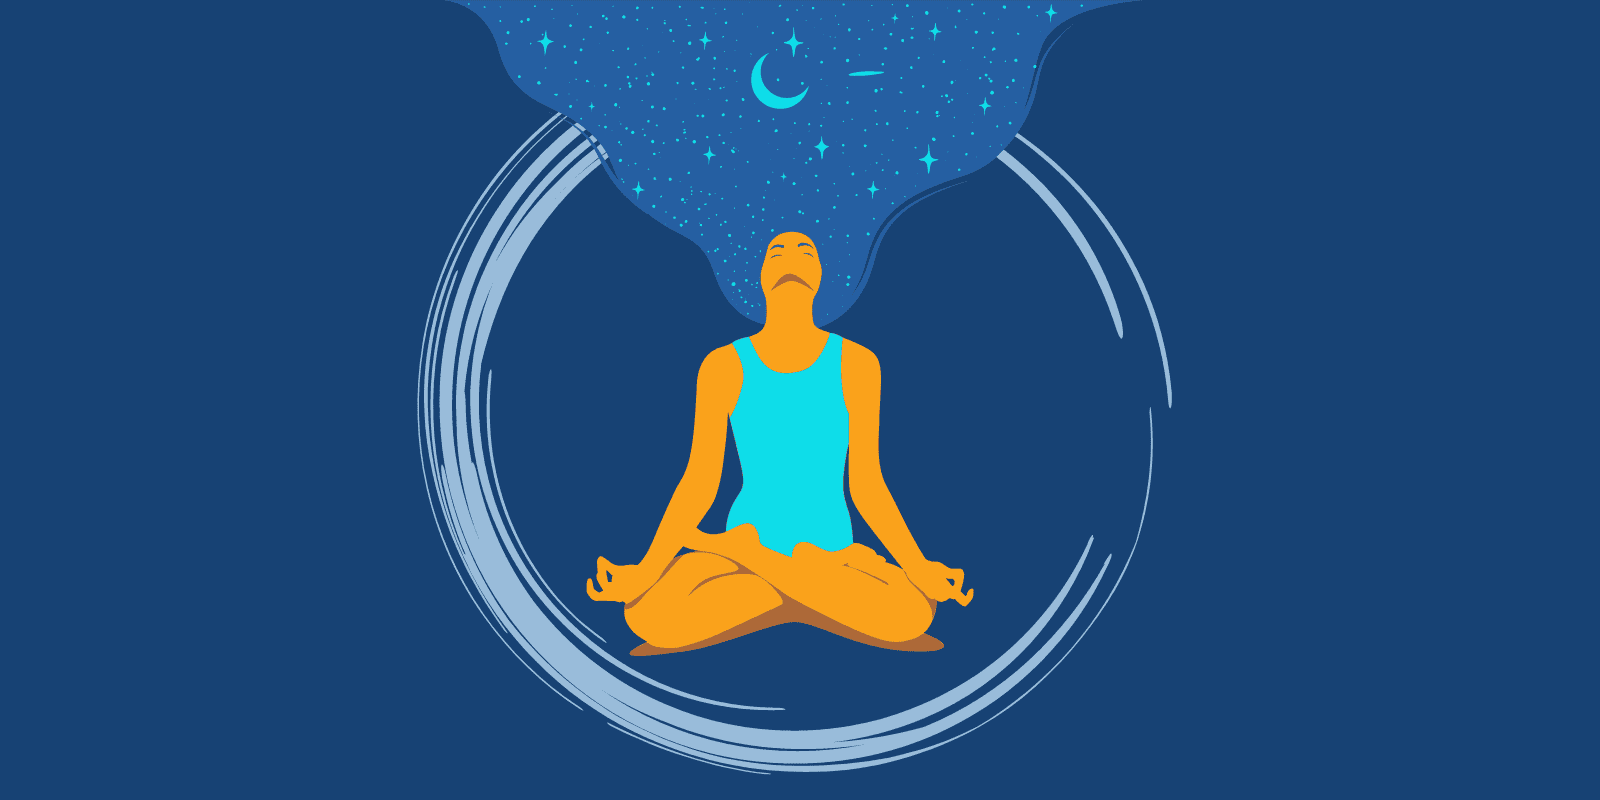 An illustration of a person meditating where her hair is displayed as a universe